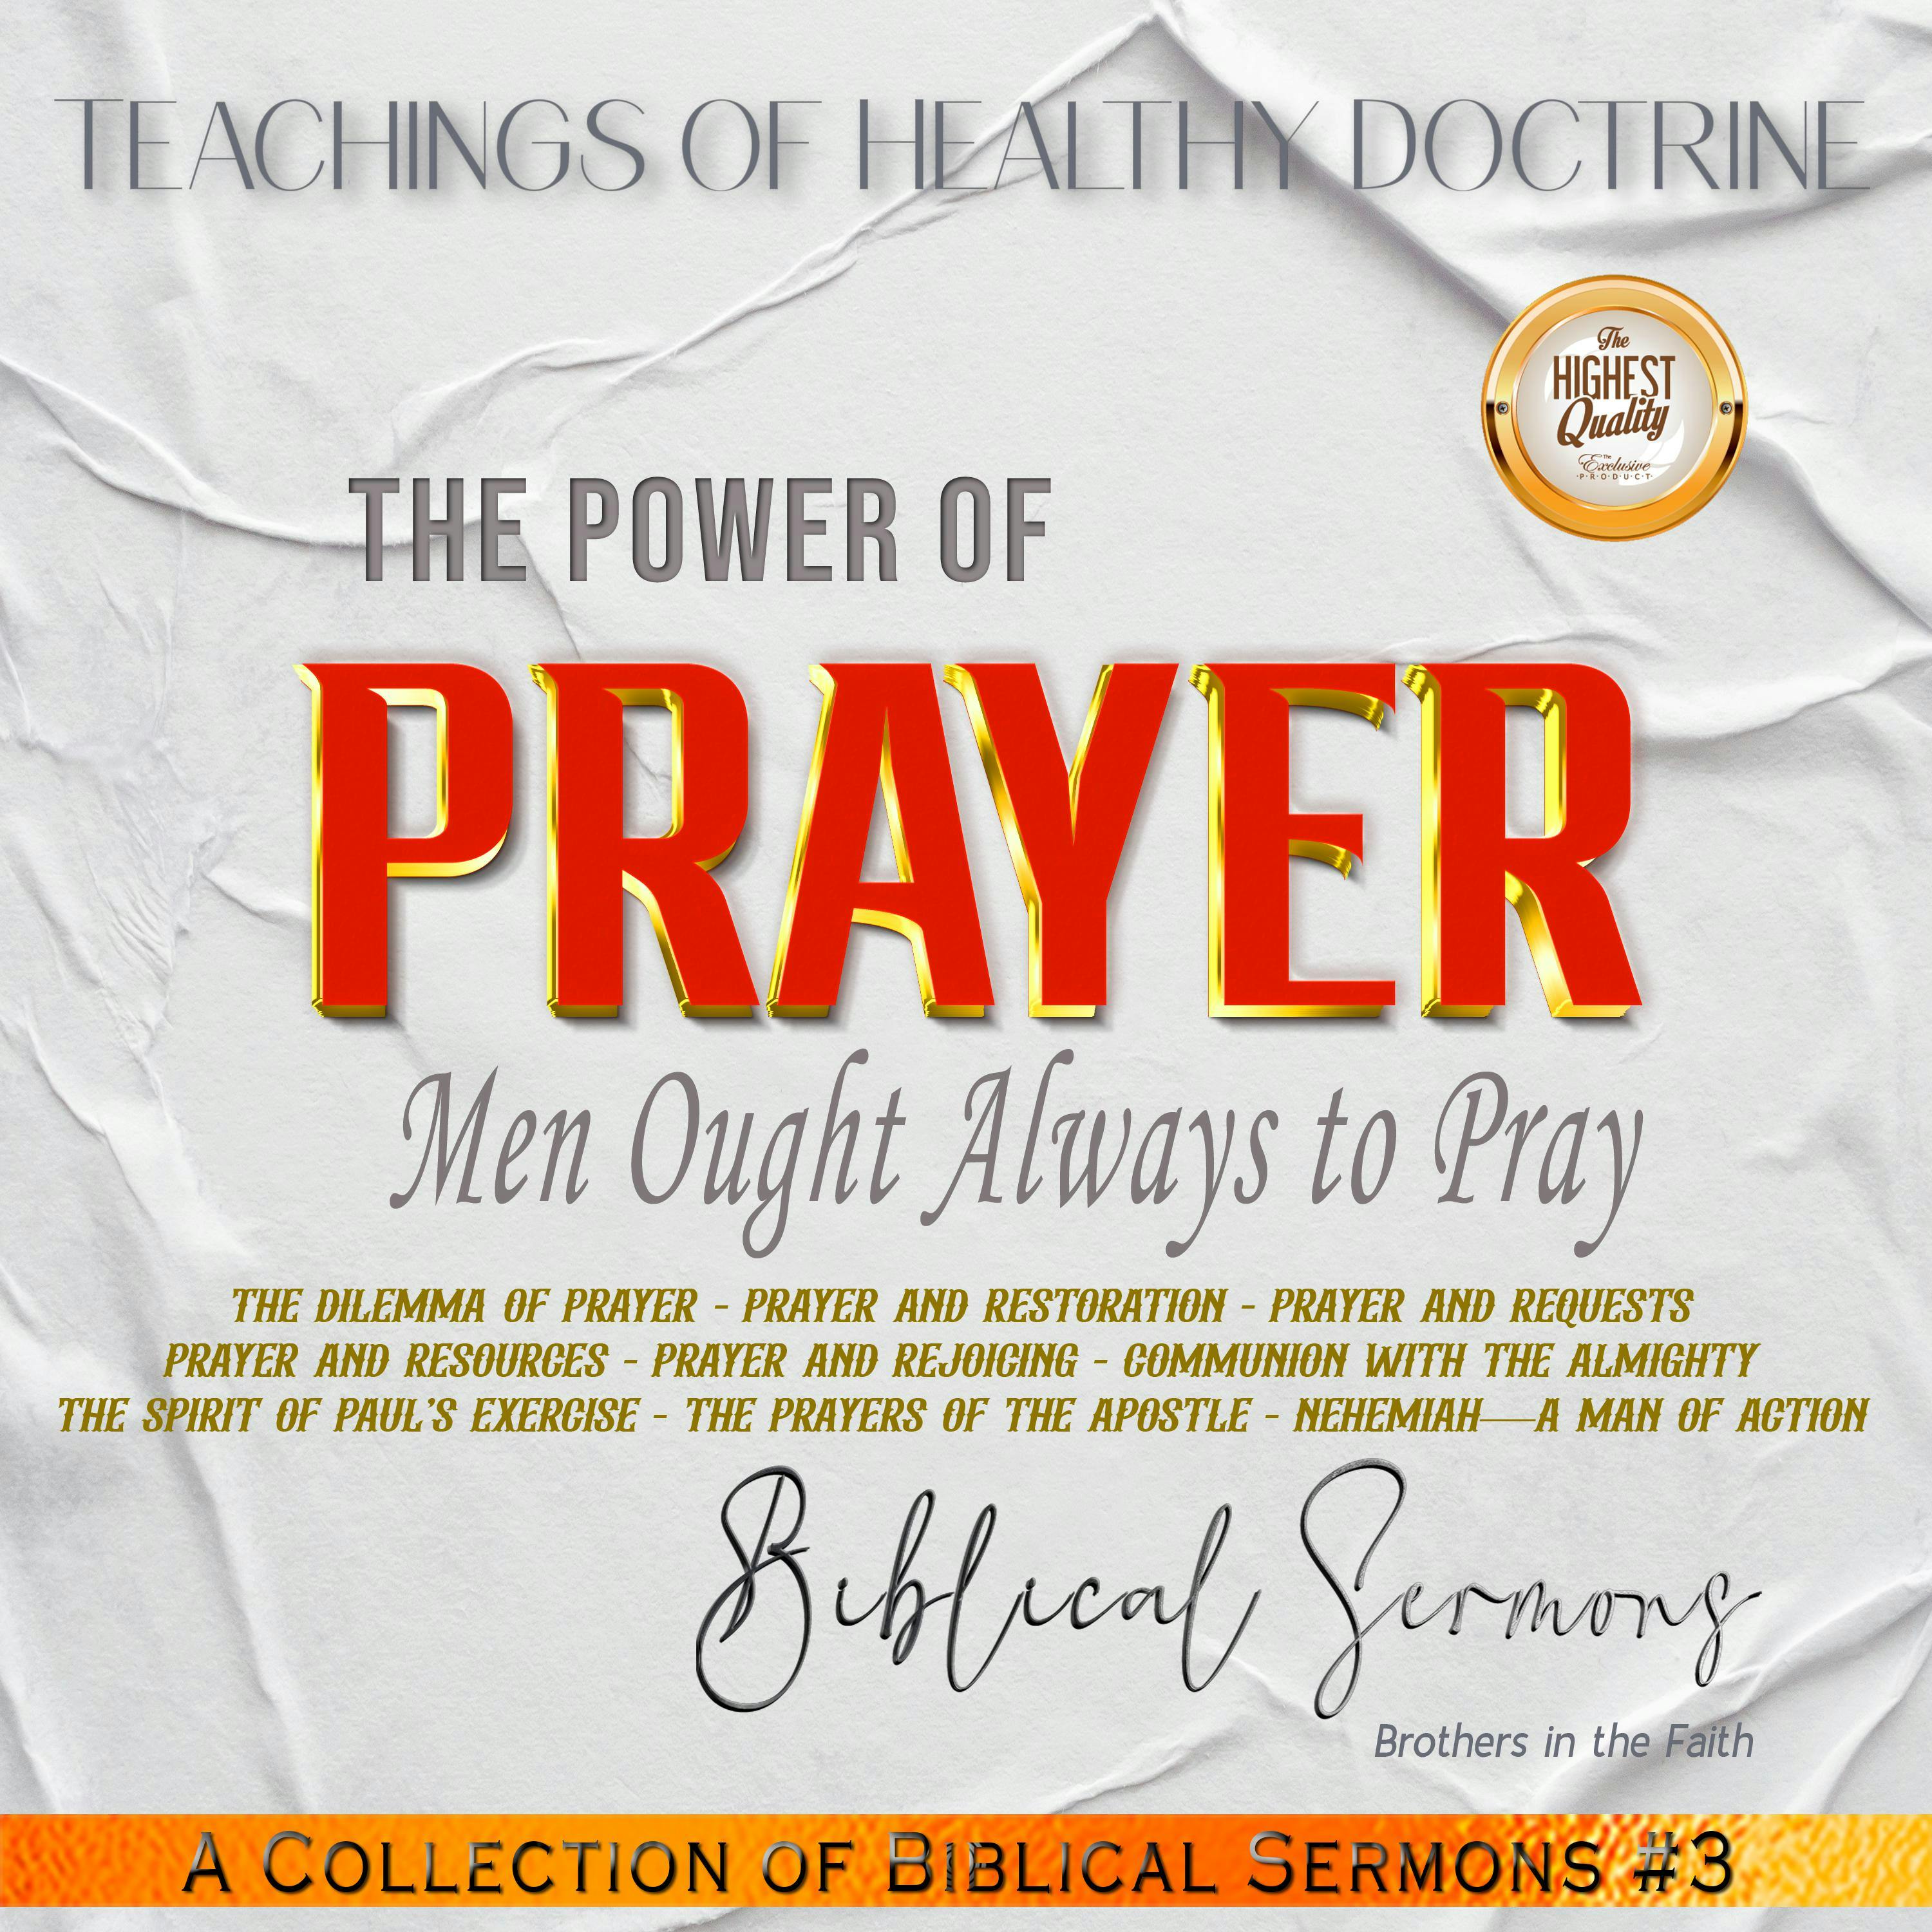 The Power of Prayer: The Dilemma of Prayer - Prayer and Restoration - Prayer and Requests Prayer and Resources - Prayer and Rejoicing - Communion with the Almighty The Spirit of Paul’s Exercise - The Prayers of the Apostle - Nehemiah—A Man of Action - undefined